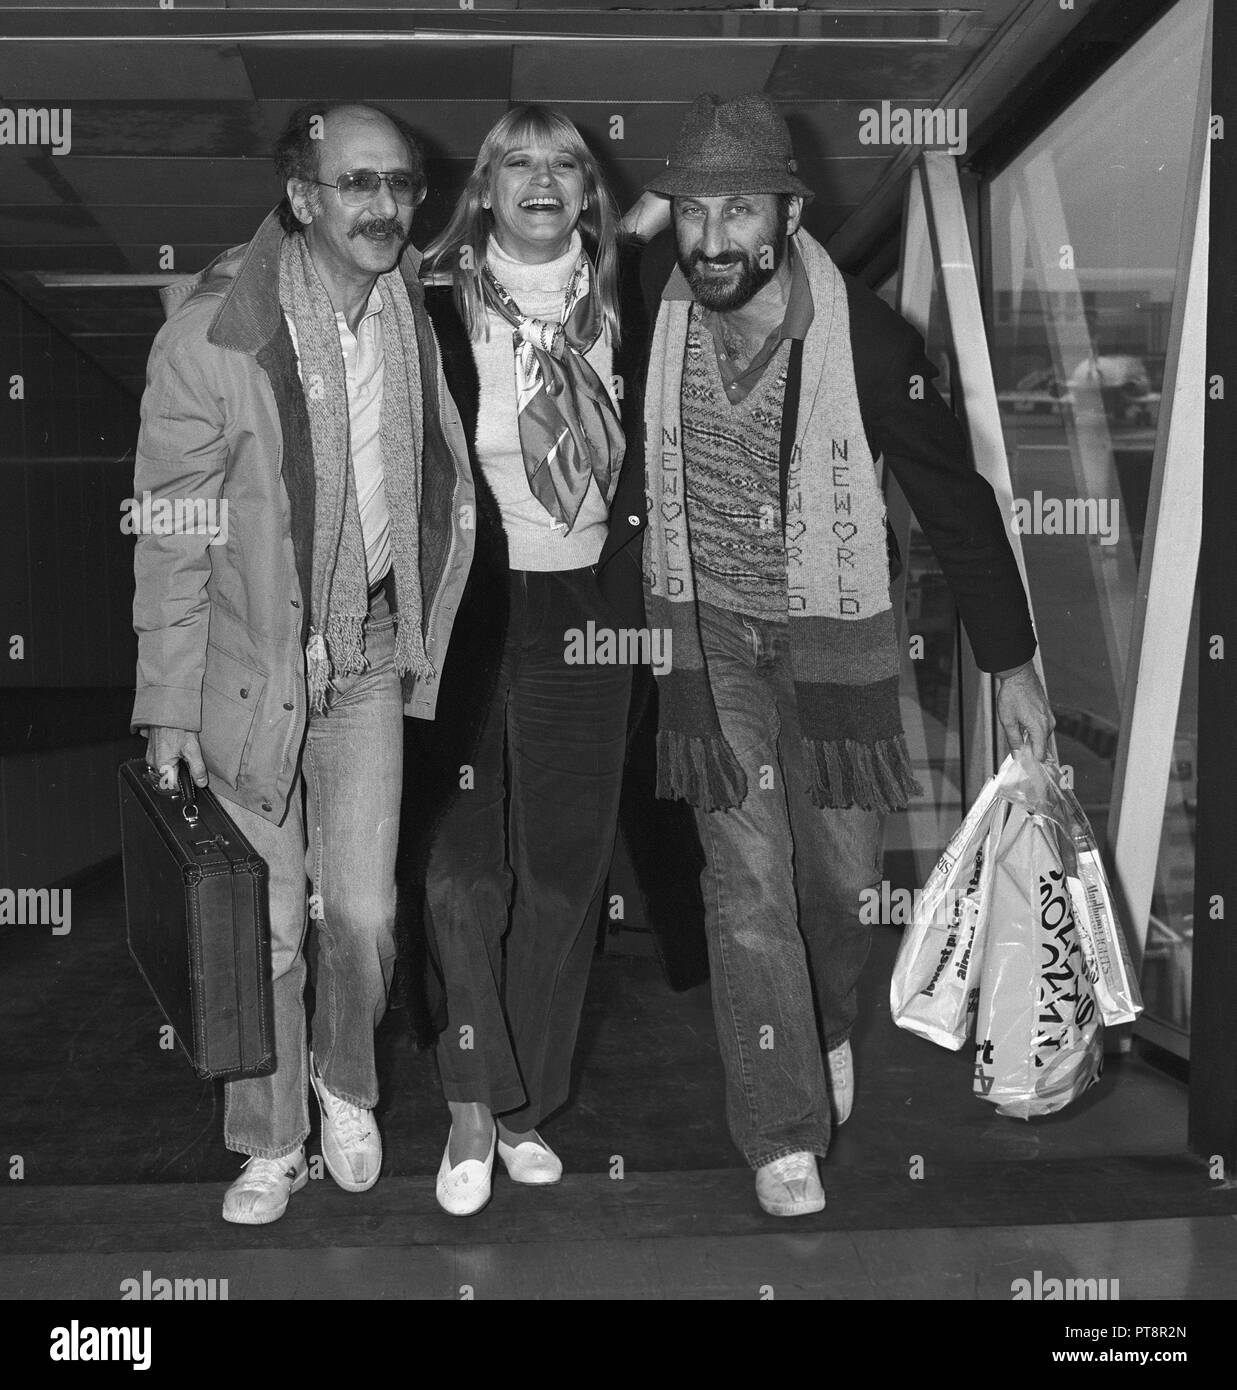 American Folk singers Peter, Paul and Mary arriving at London's heathrow Airport in 1988. Stock Photo